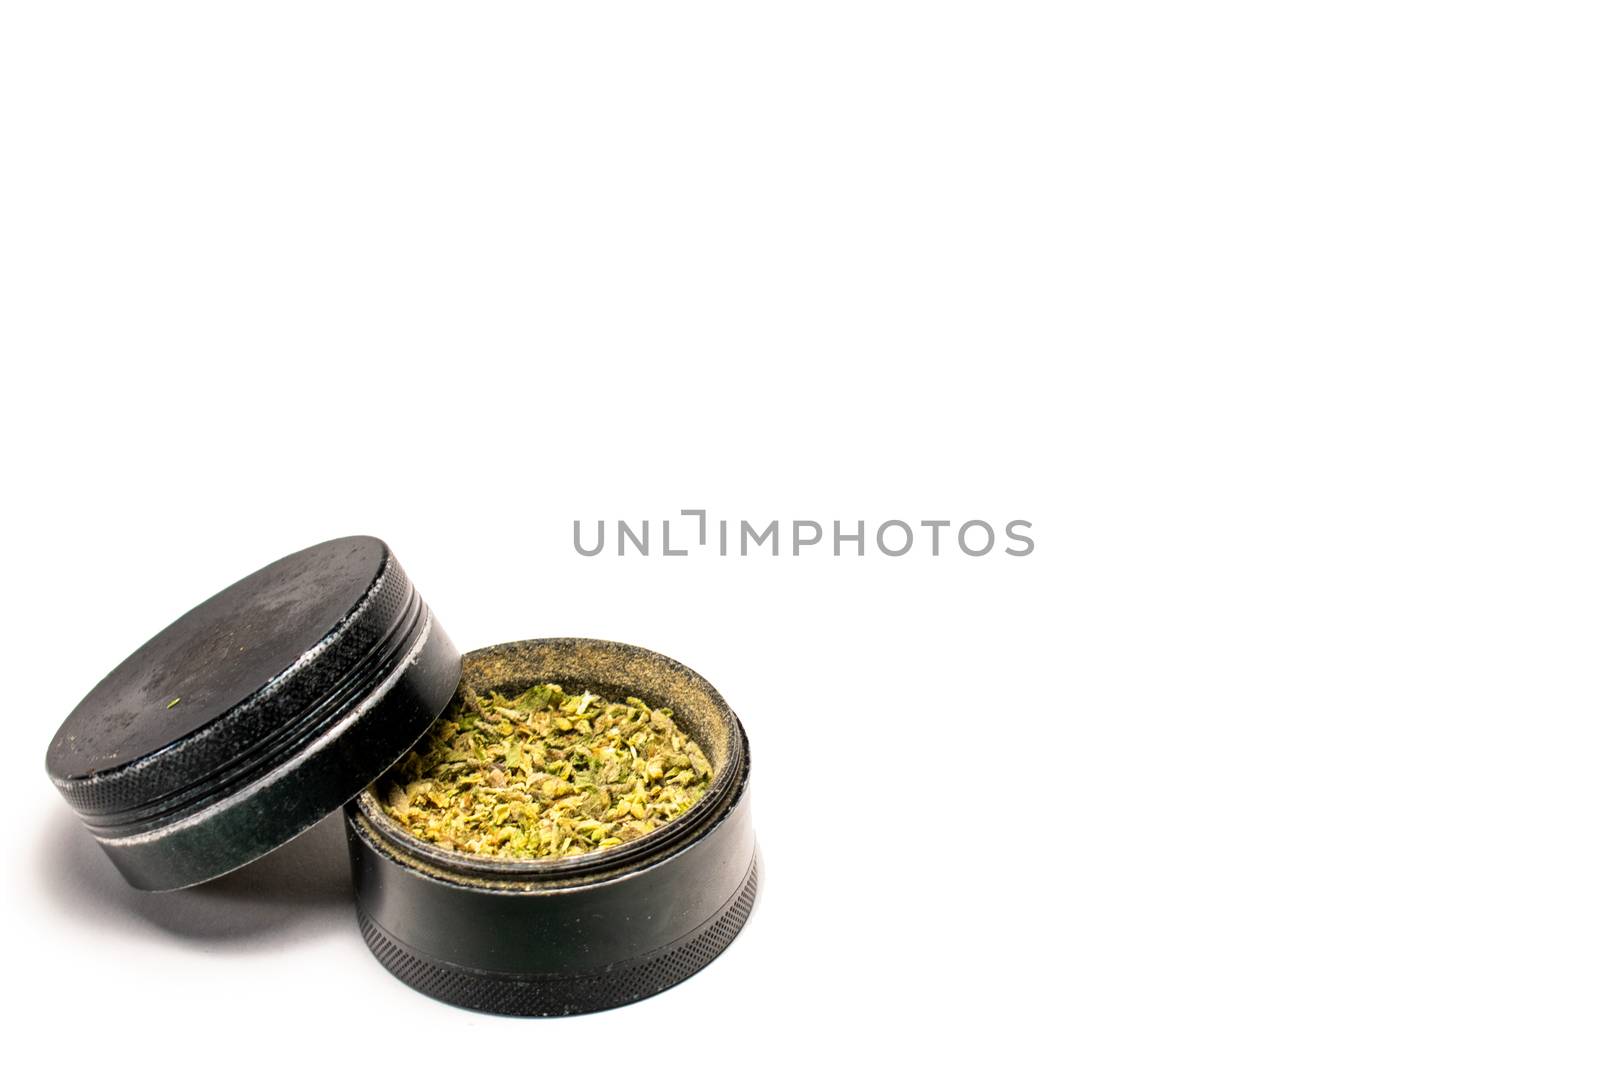 A Black Grinder Full of Green and Orange Cannabis on a Pure Whit by bju12290